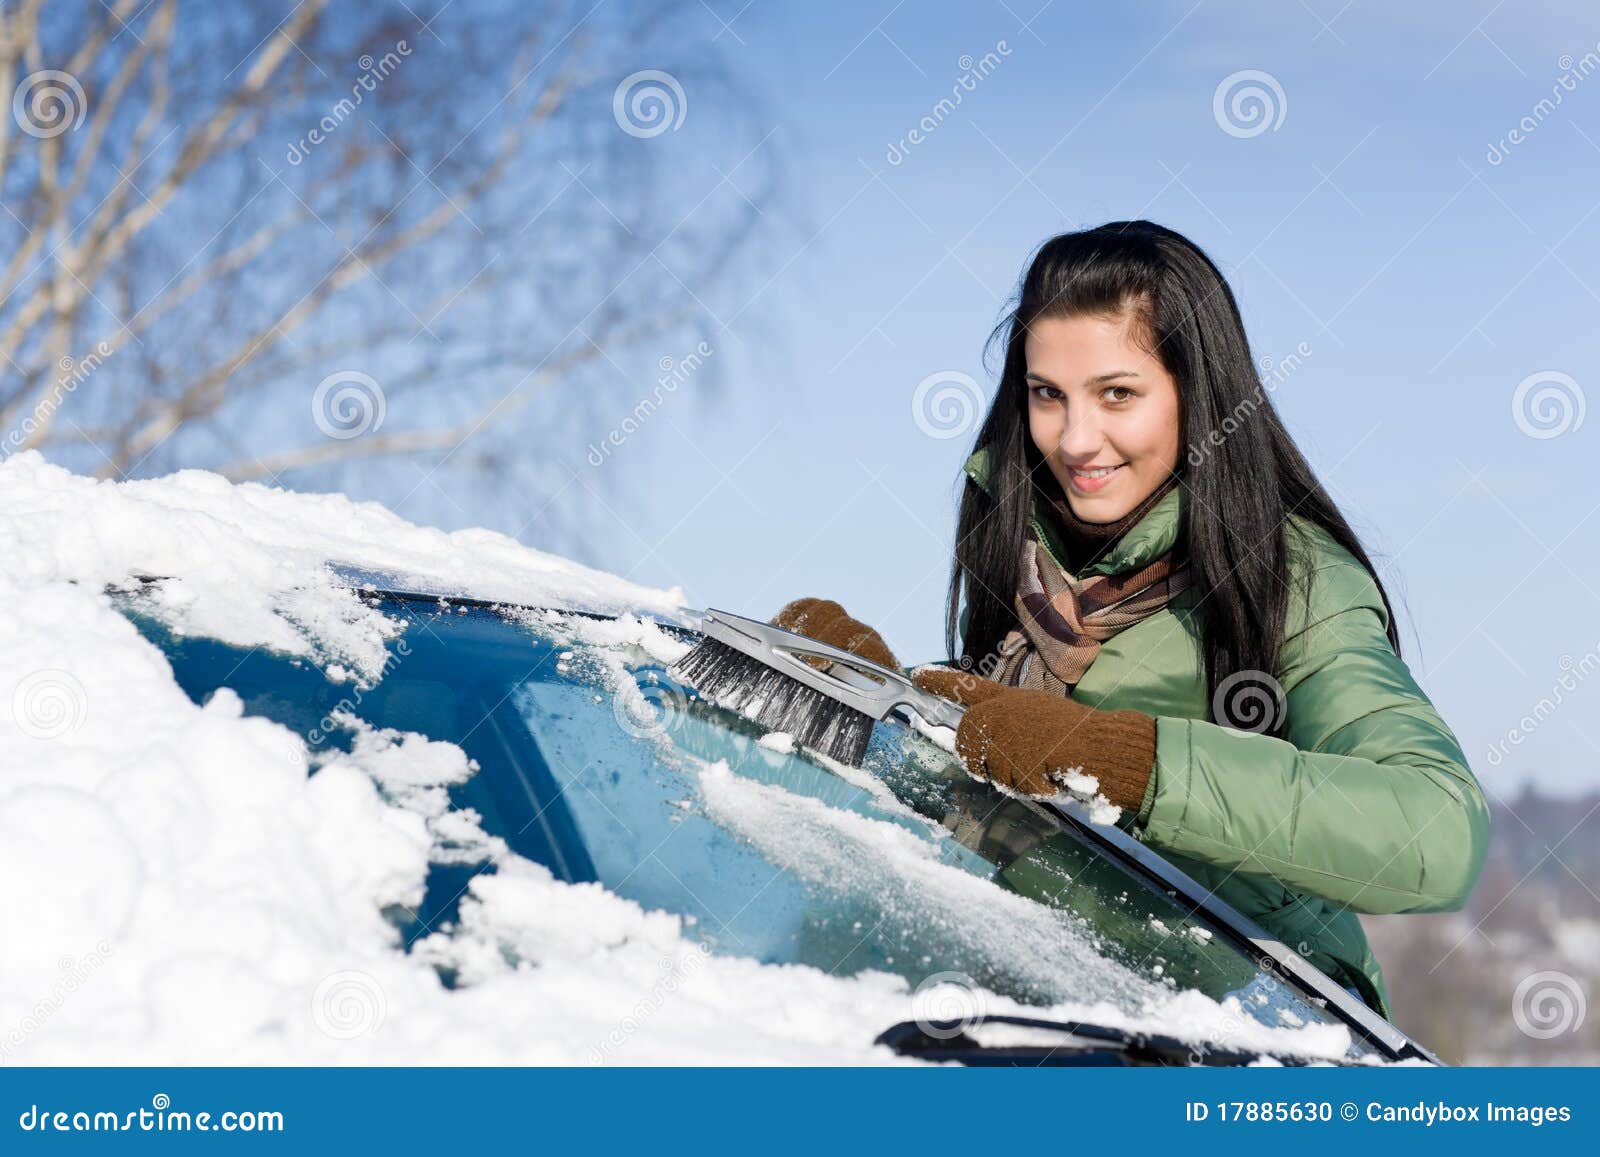 winter car - woman remove snow from windshield